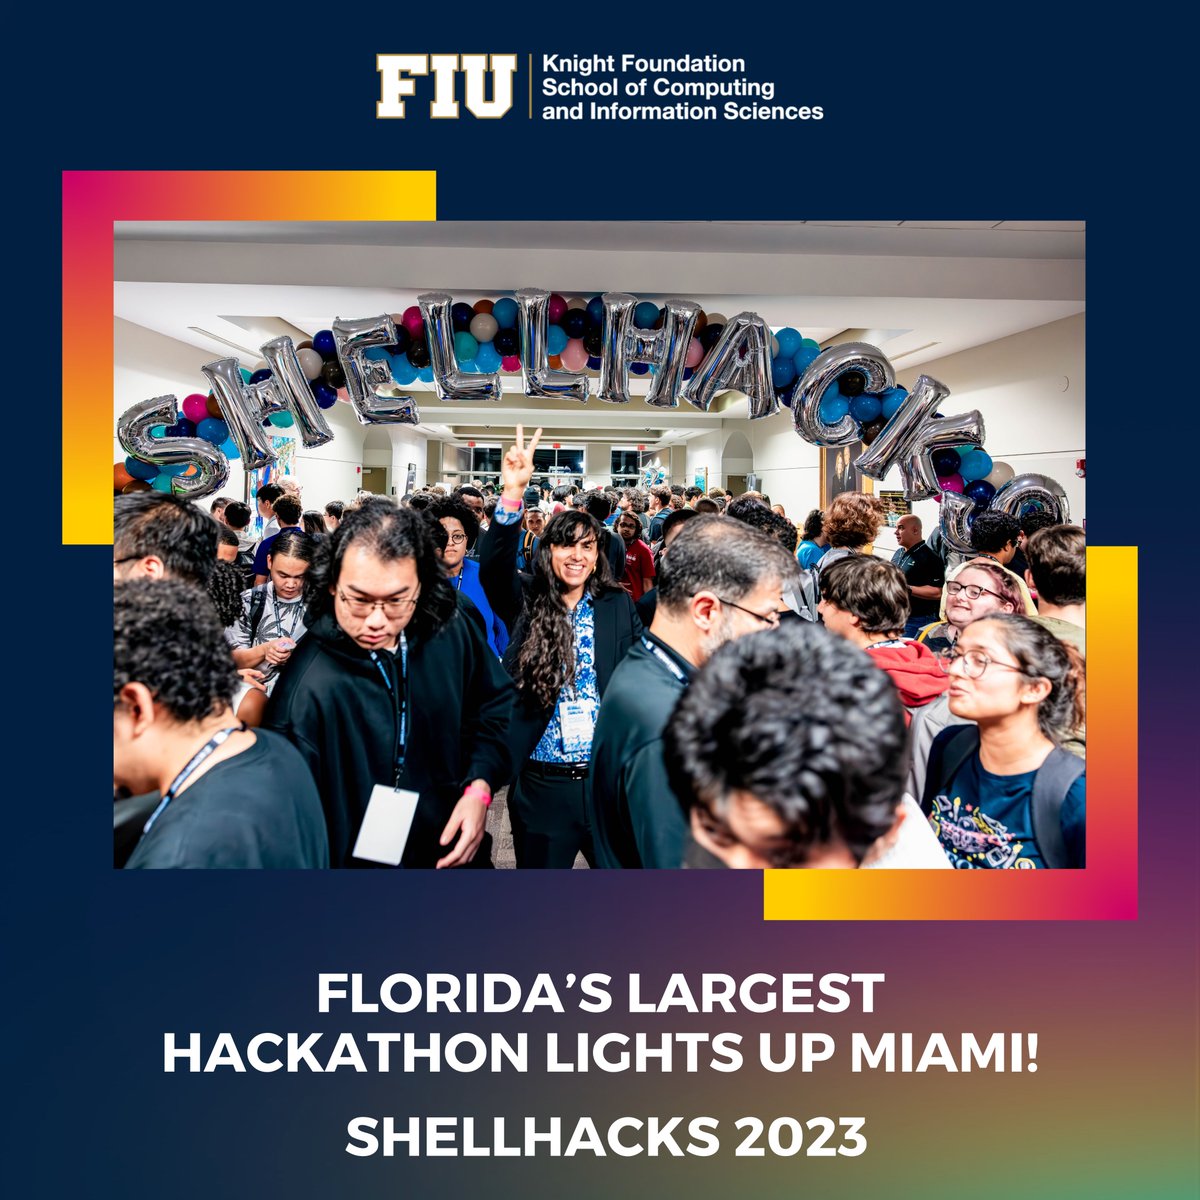 Florida's tech movement is in full swing, evident at INIT FIU ShellHacks —the state's largest hackathon held at FIU’s Biscayne Bay Campus. Over 1,200 hackers, including FIU's College of Engineering and Computing students, came together for this coding frenzy. #Hackathon